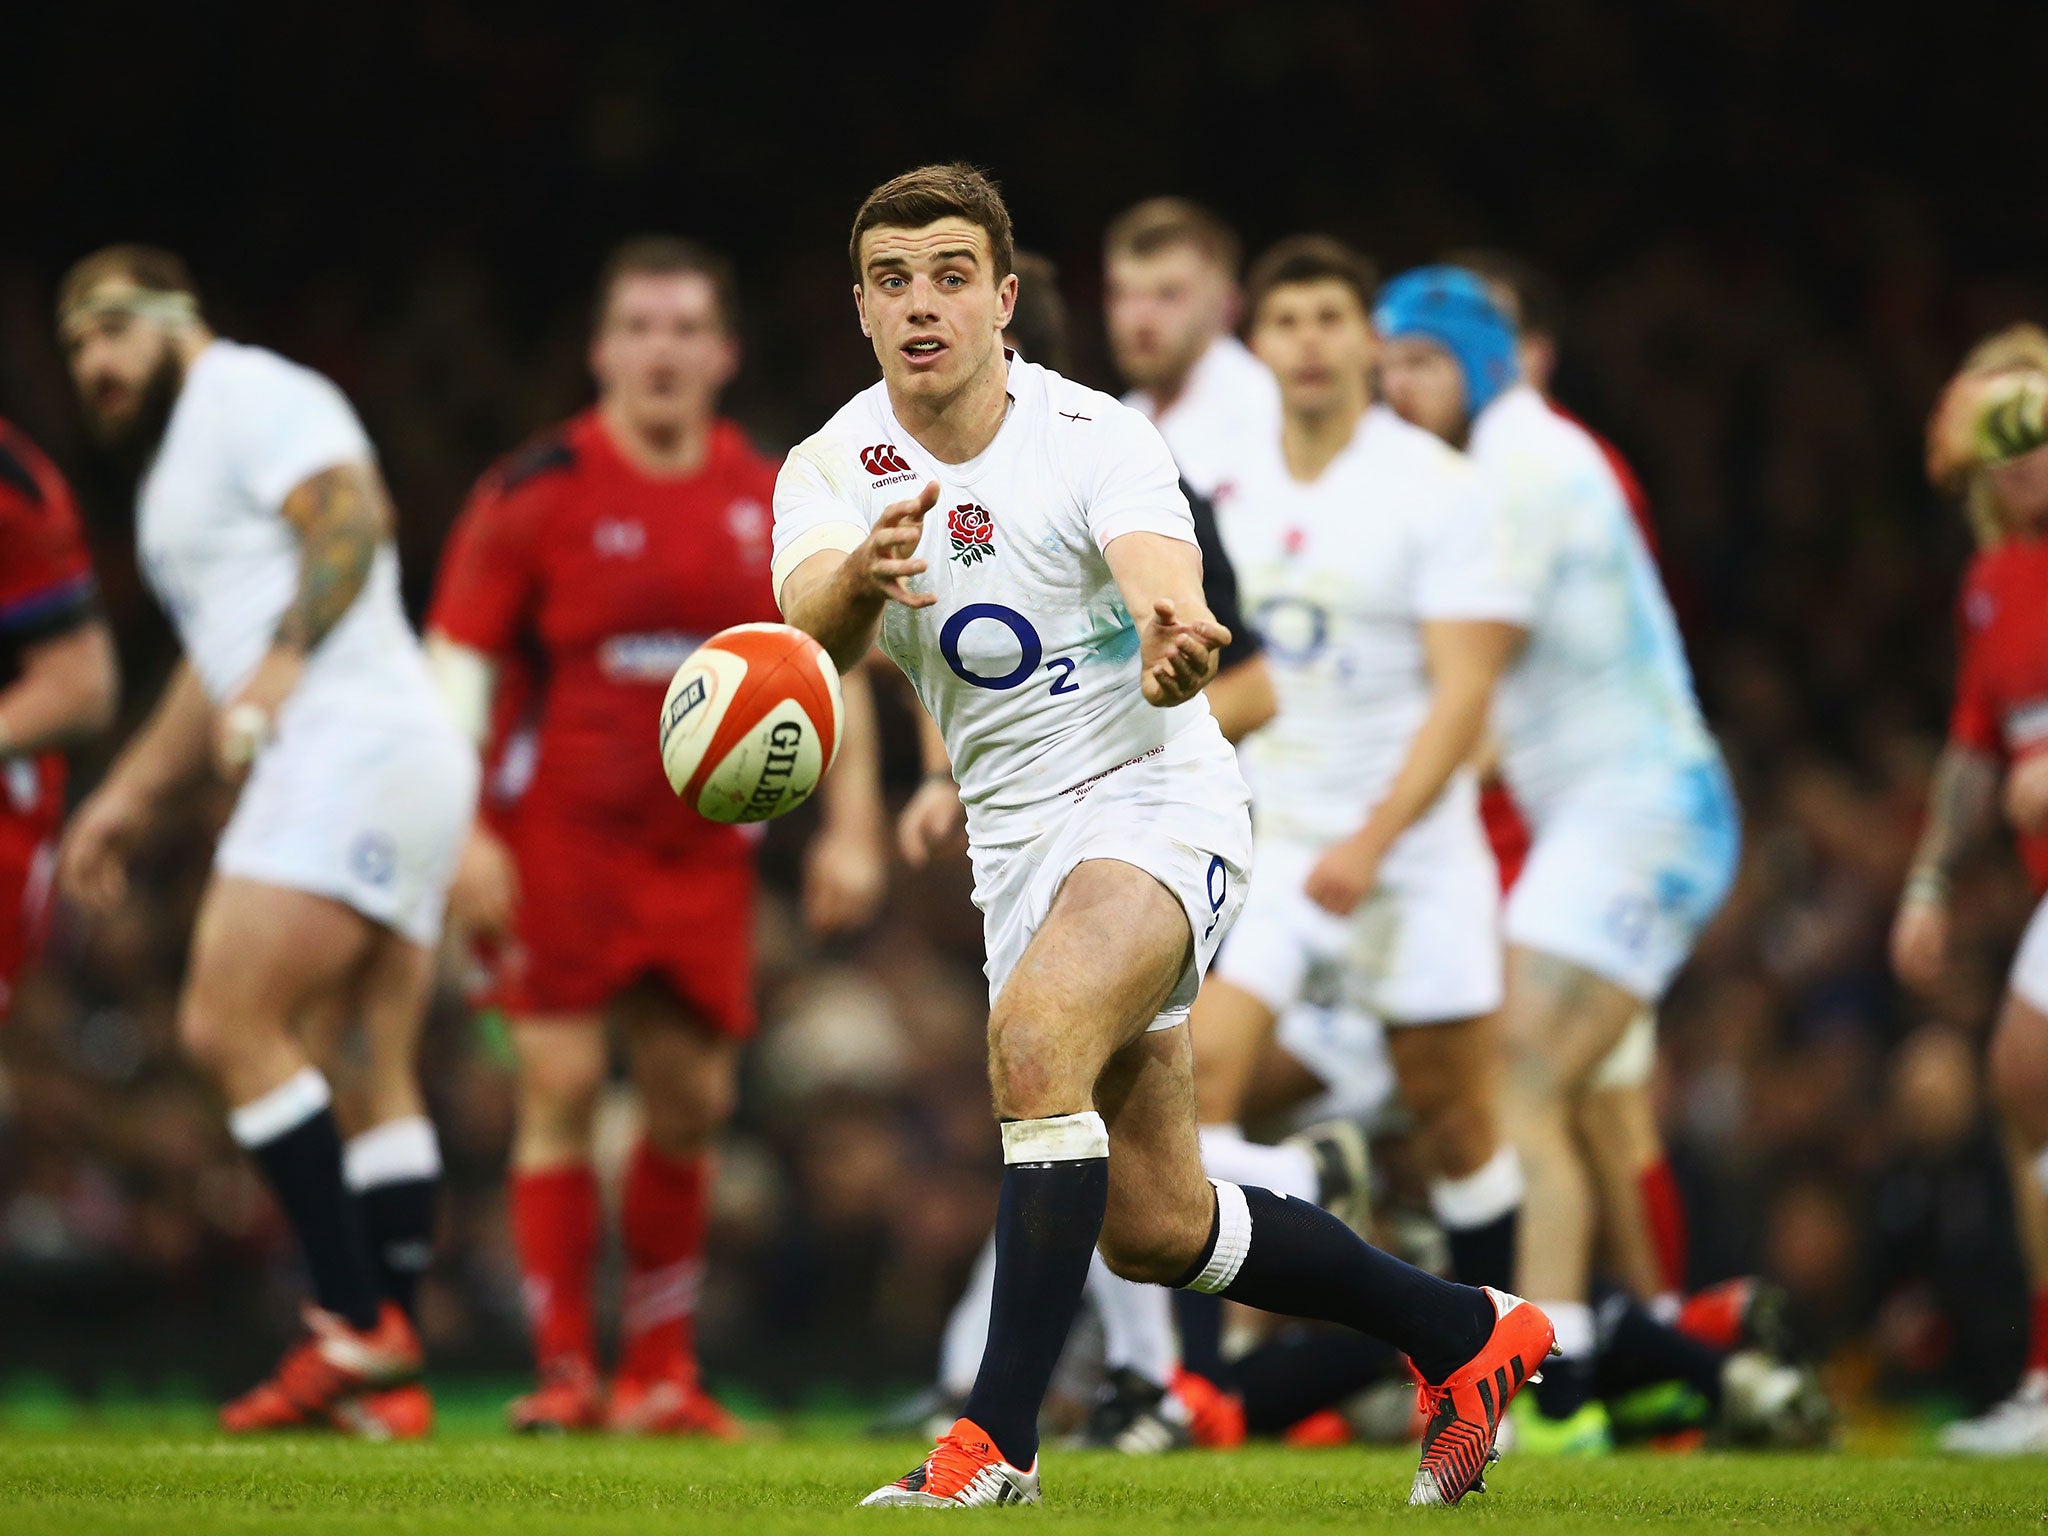 George Ford (left) makes a pass